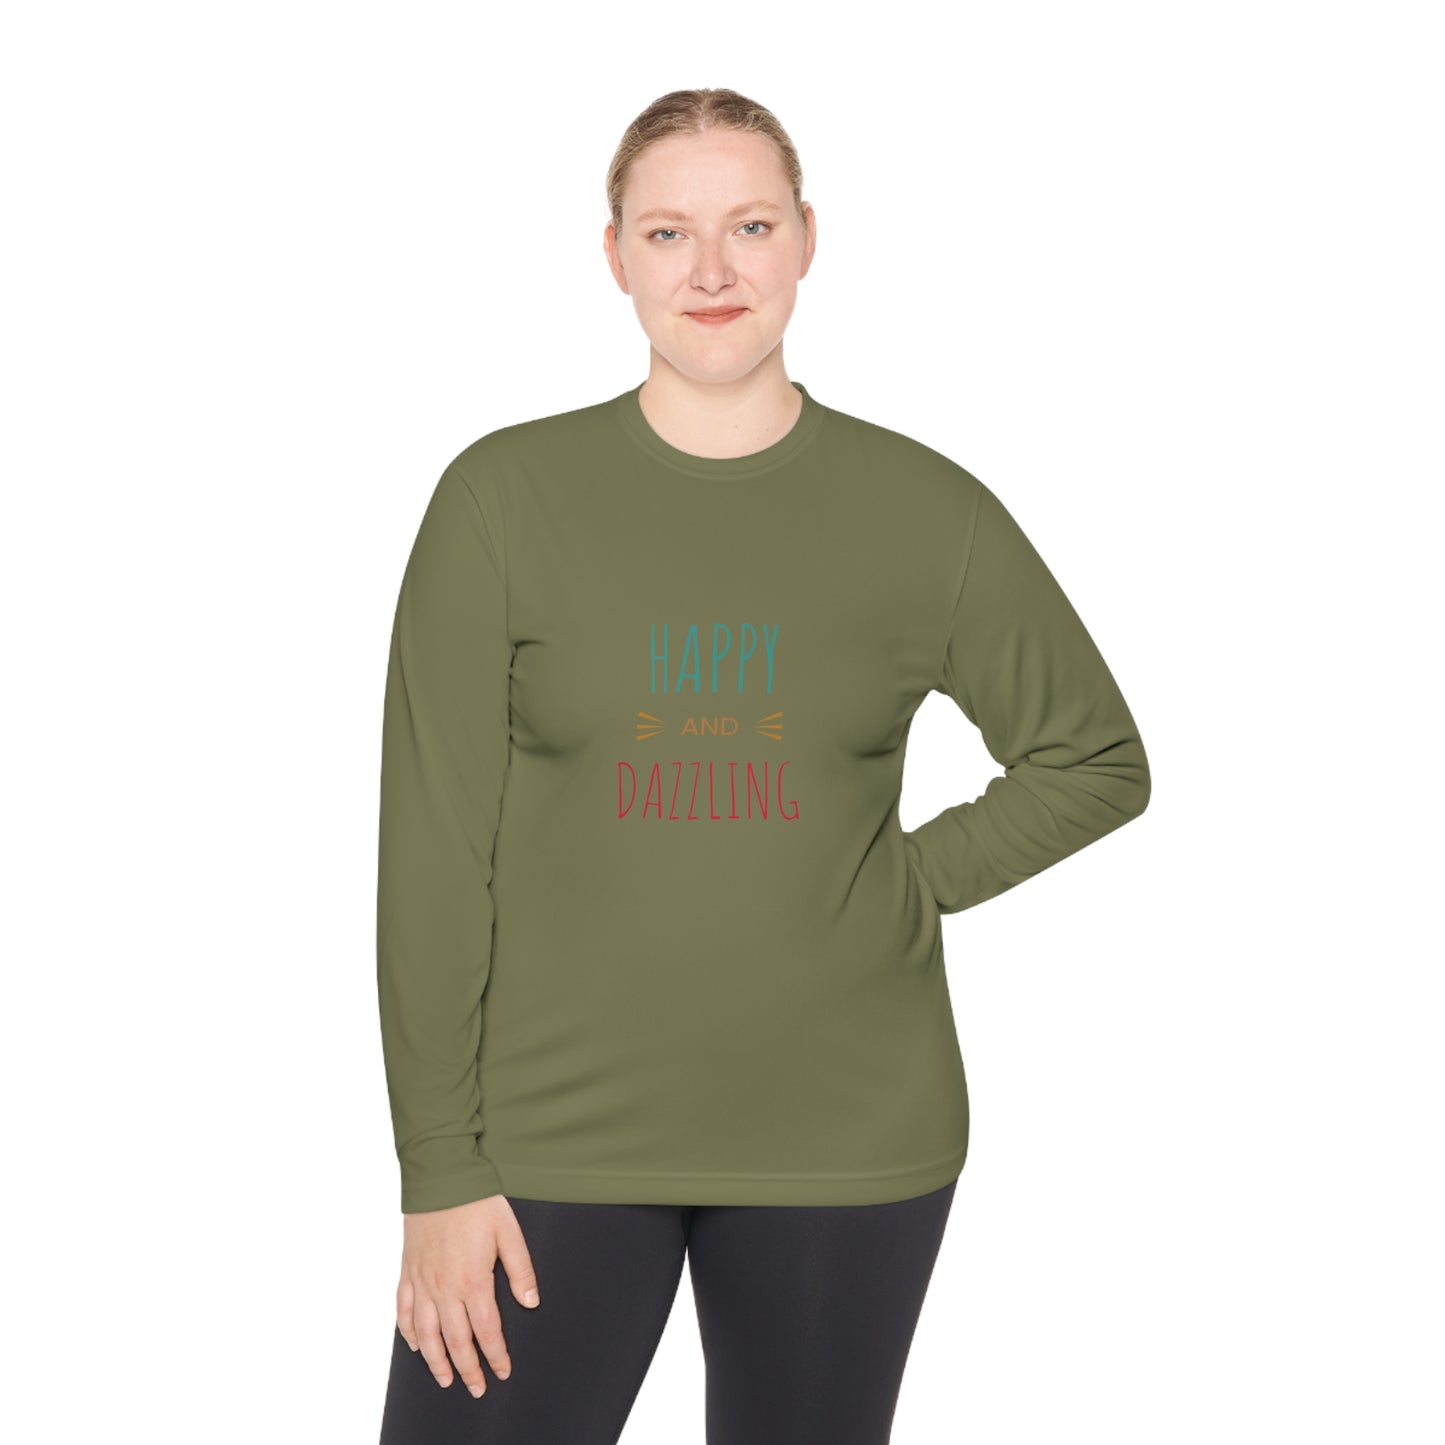 Happy and Dazzling Unisex Lightweight Long Sleeve Tee*